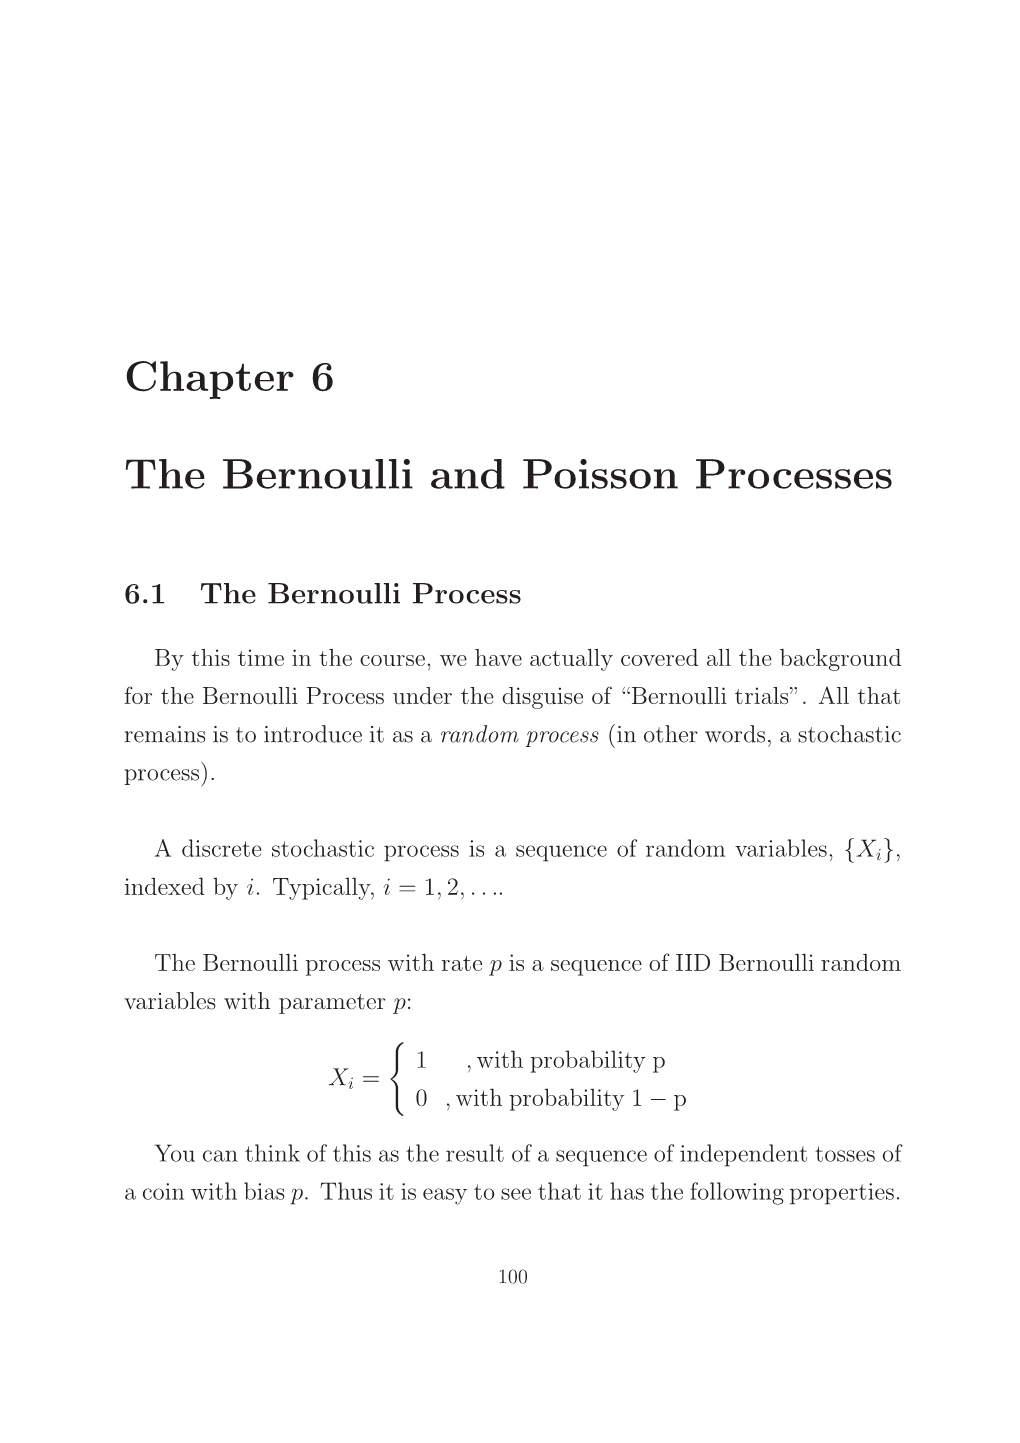 Chapter 6 the Bernoulli and Poisson Processes